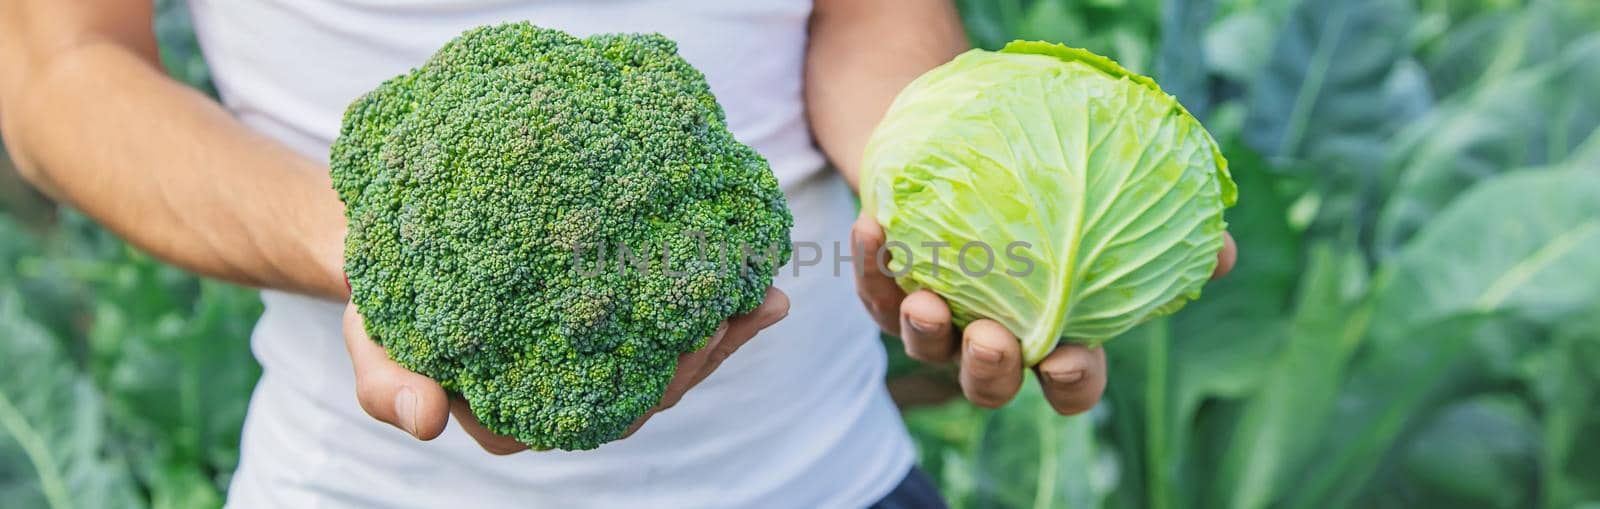 Man farmer with cabbage and broccoli in his hands. Selective focus. nature.